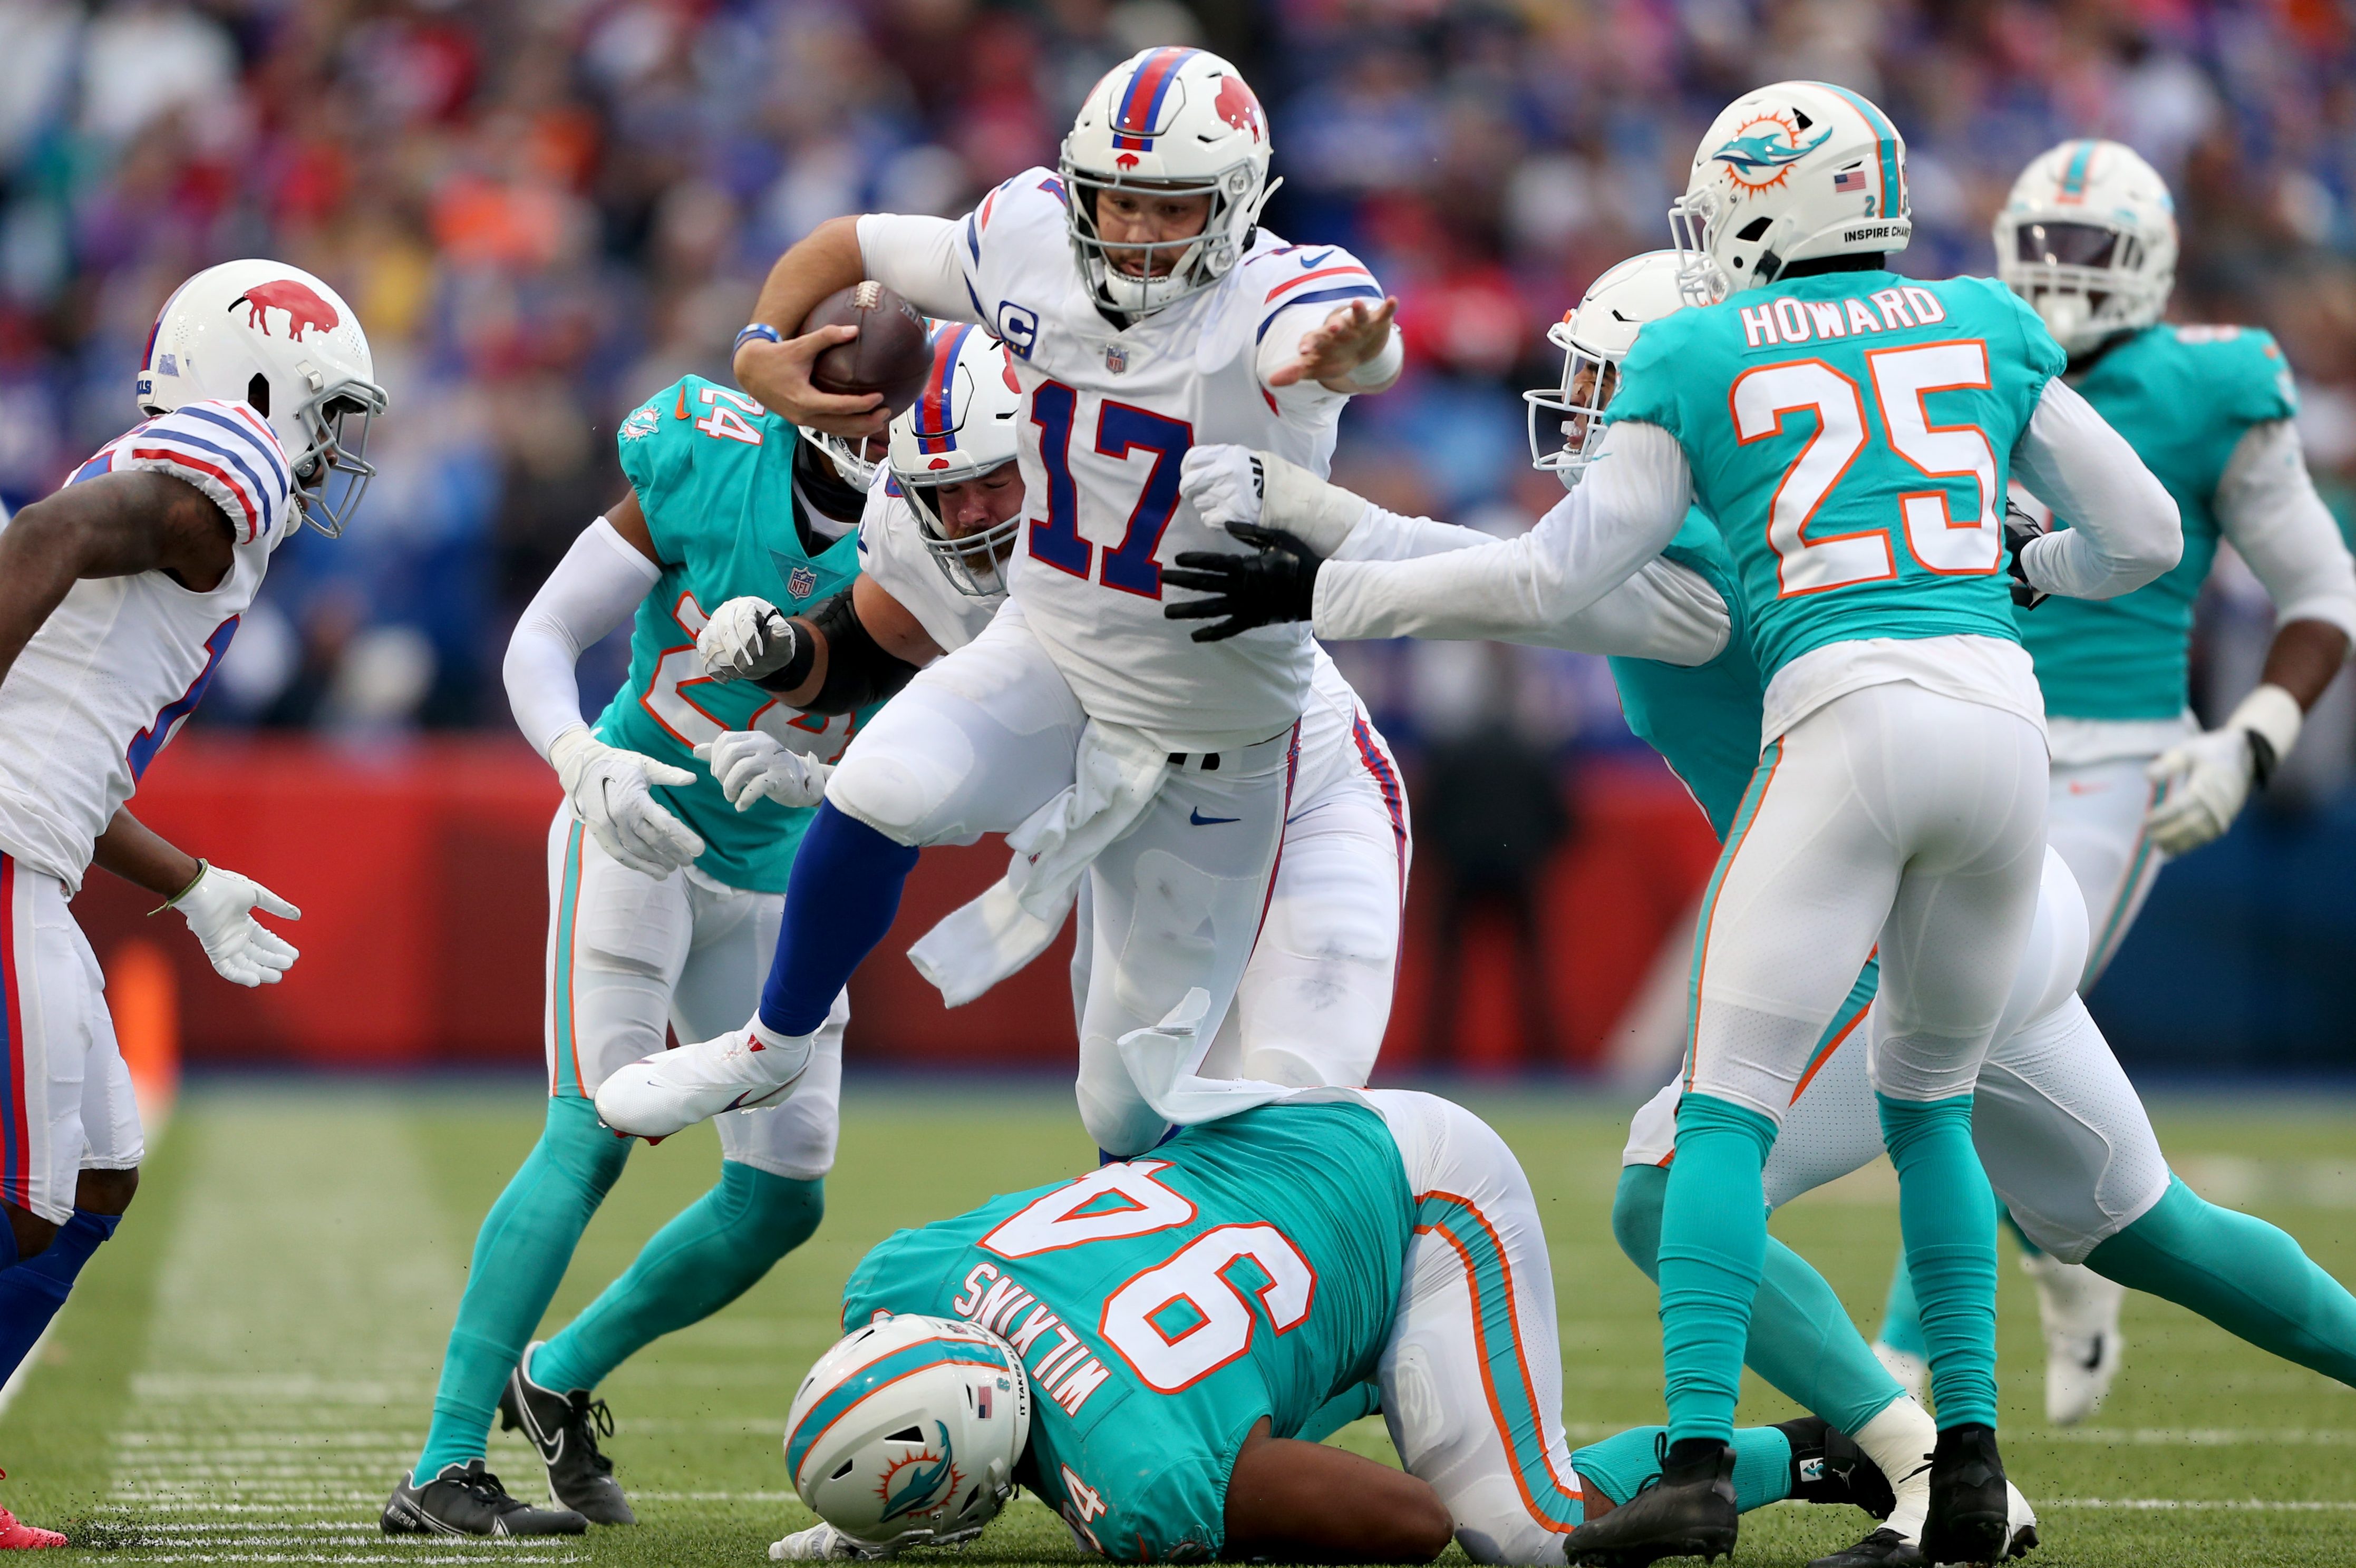 Top photos from Buffalo Bills' Week 3 game vs. Miami Dolphins